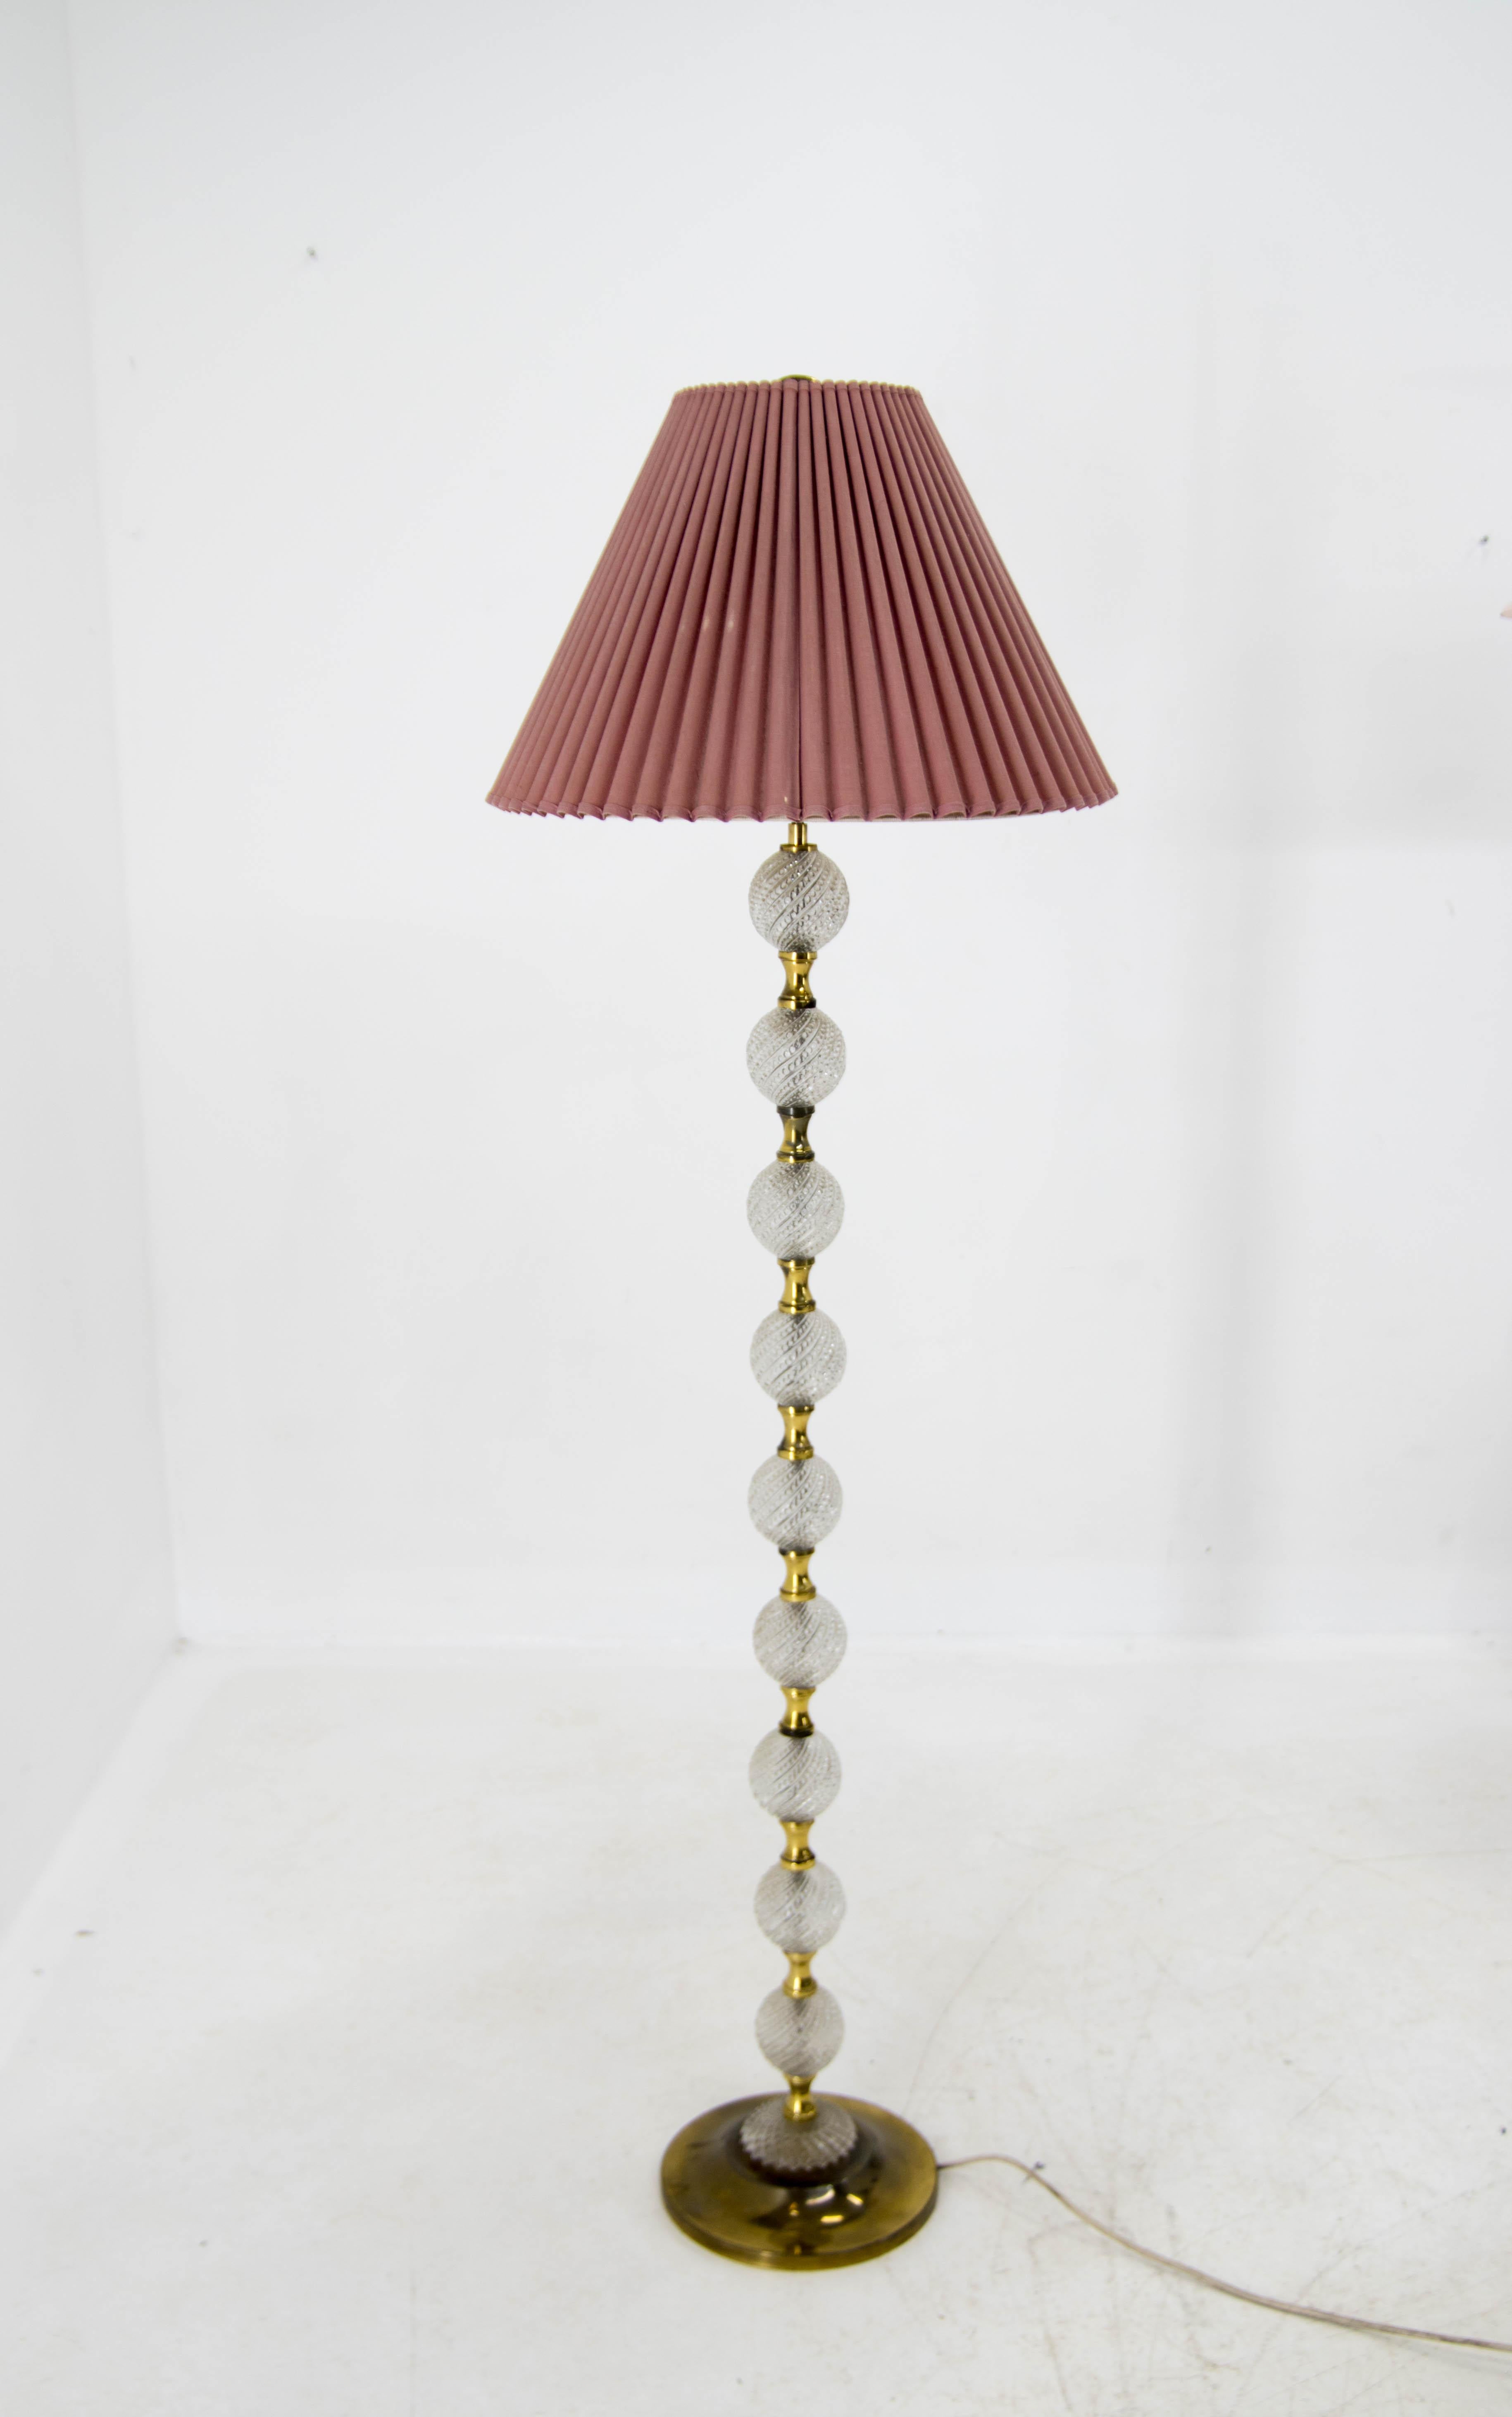 Floor lamp made of brass, glass and fabric.
Signed DBGM on a bottom.
Very good original condition.
Rewired: 2x40W, E25-E27 bulbs.
US plug adapter included.